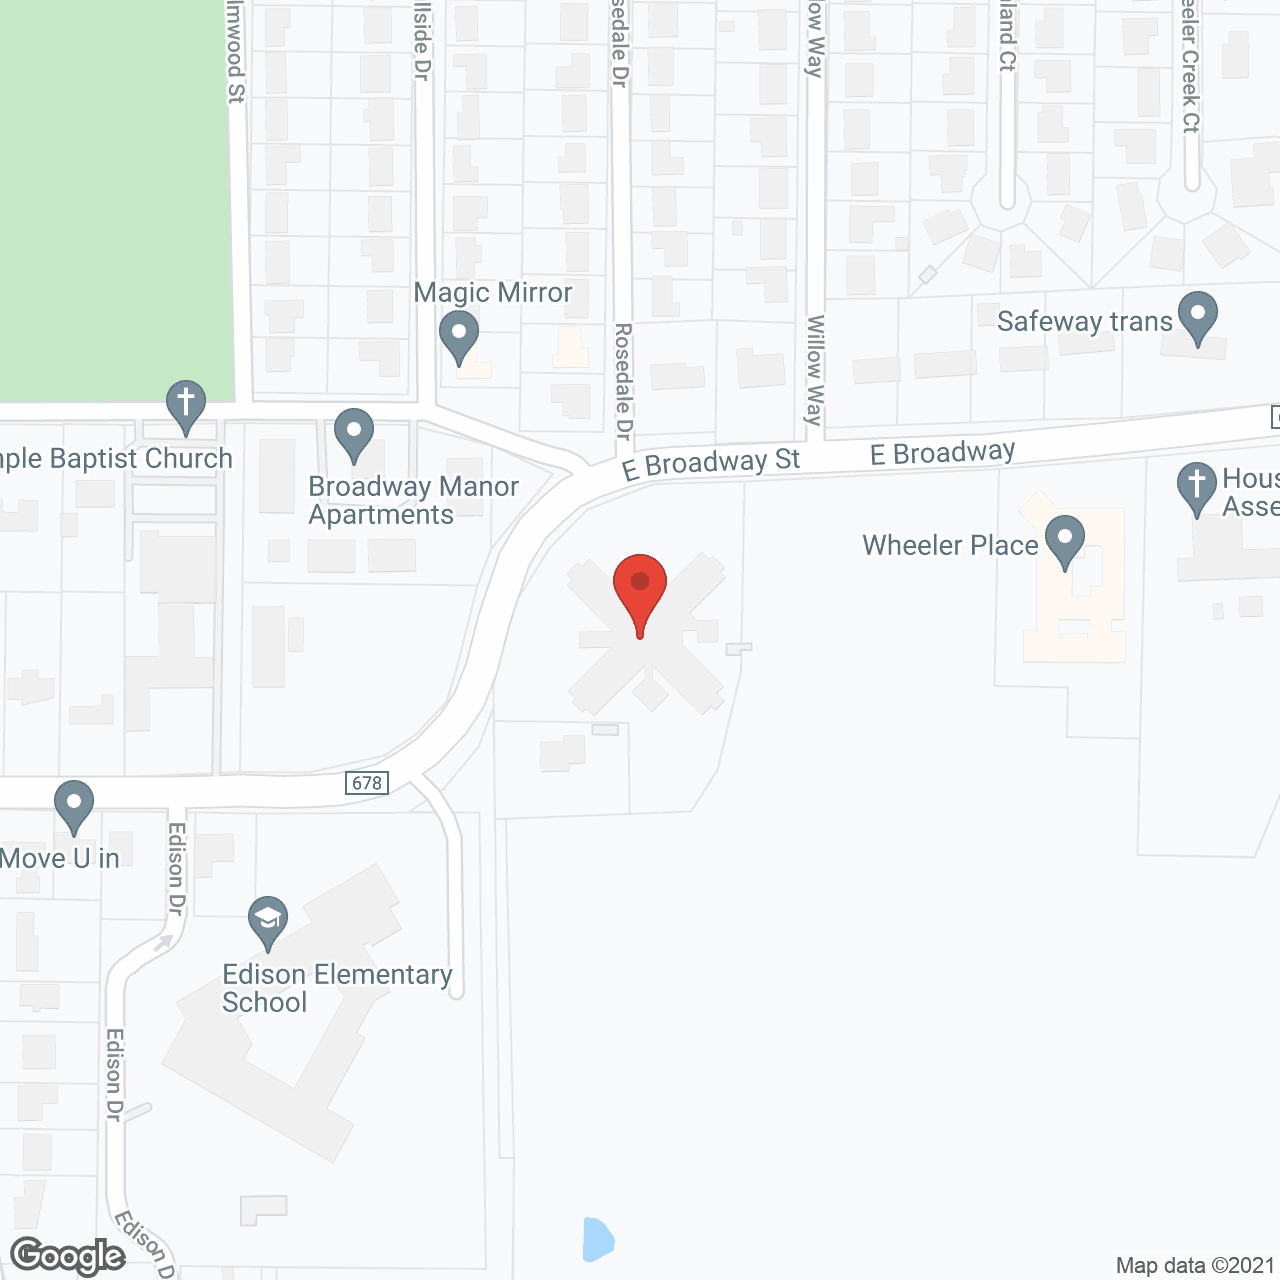 Pecan Tree Health Care and Rehabilitation Center in google map